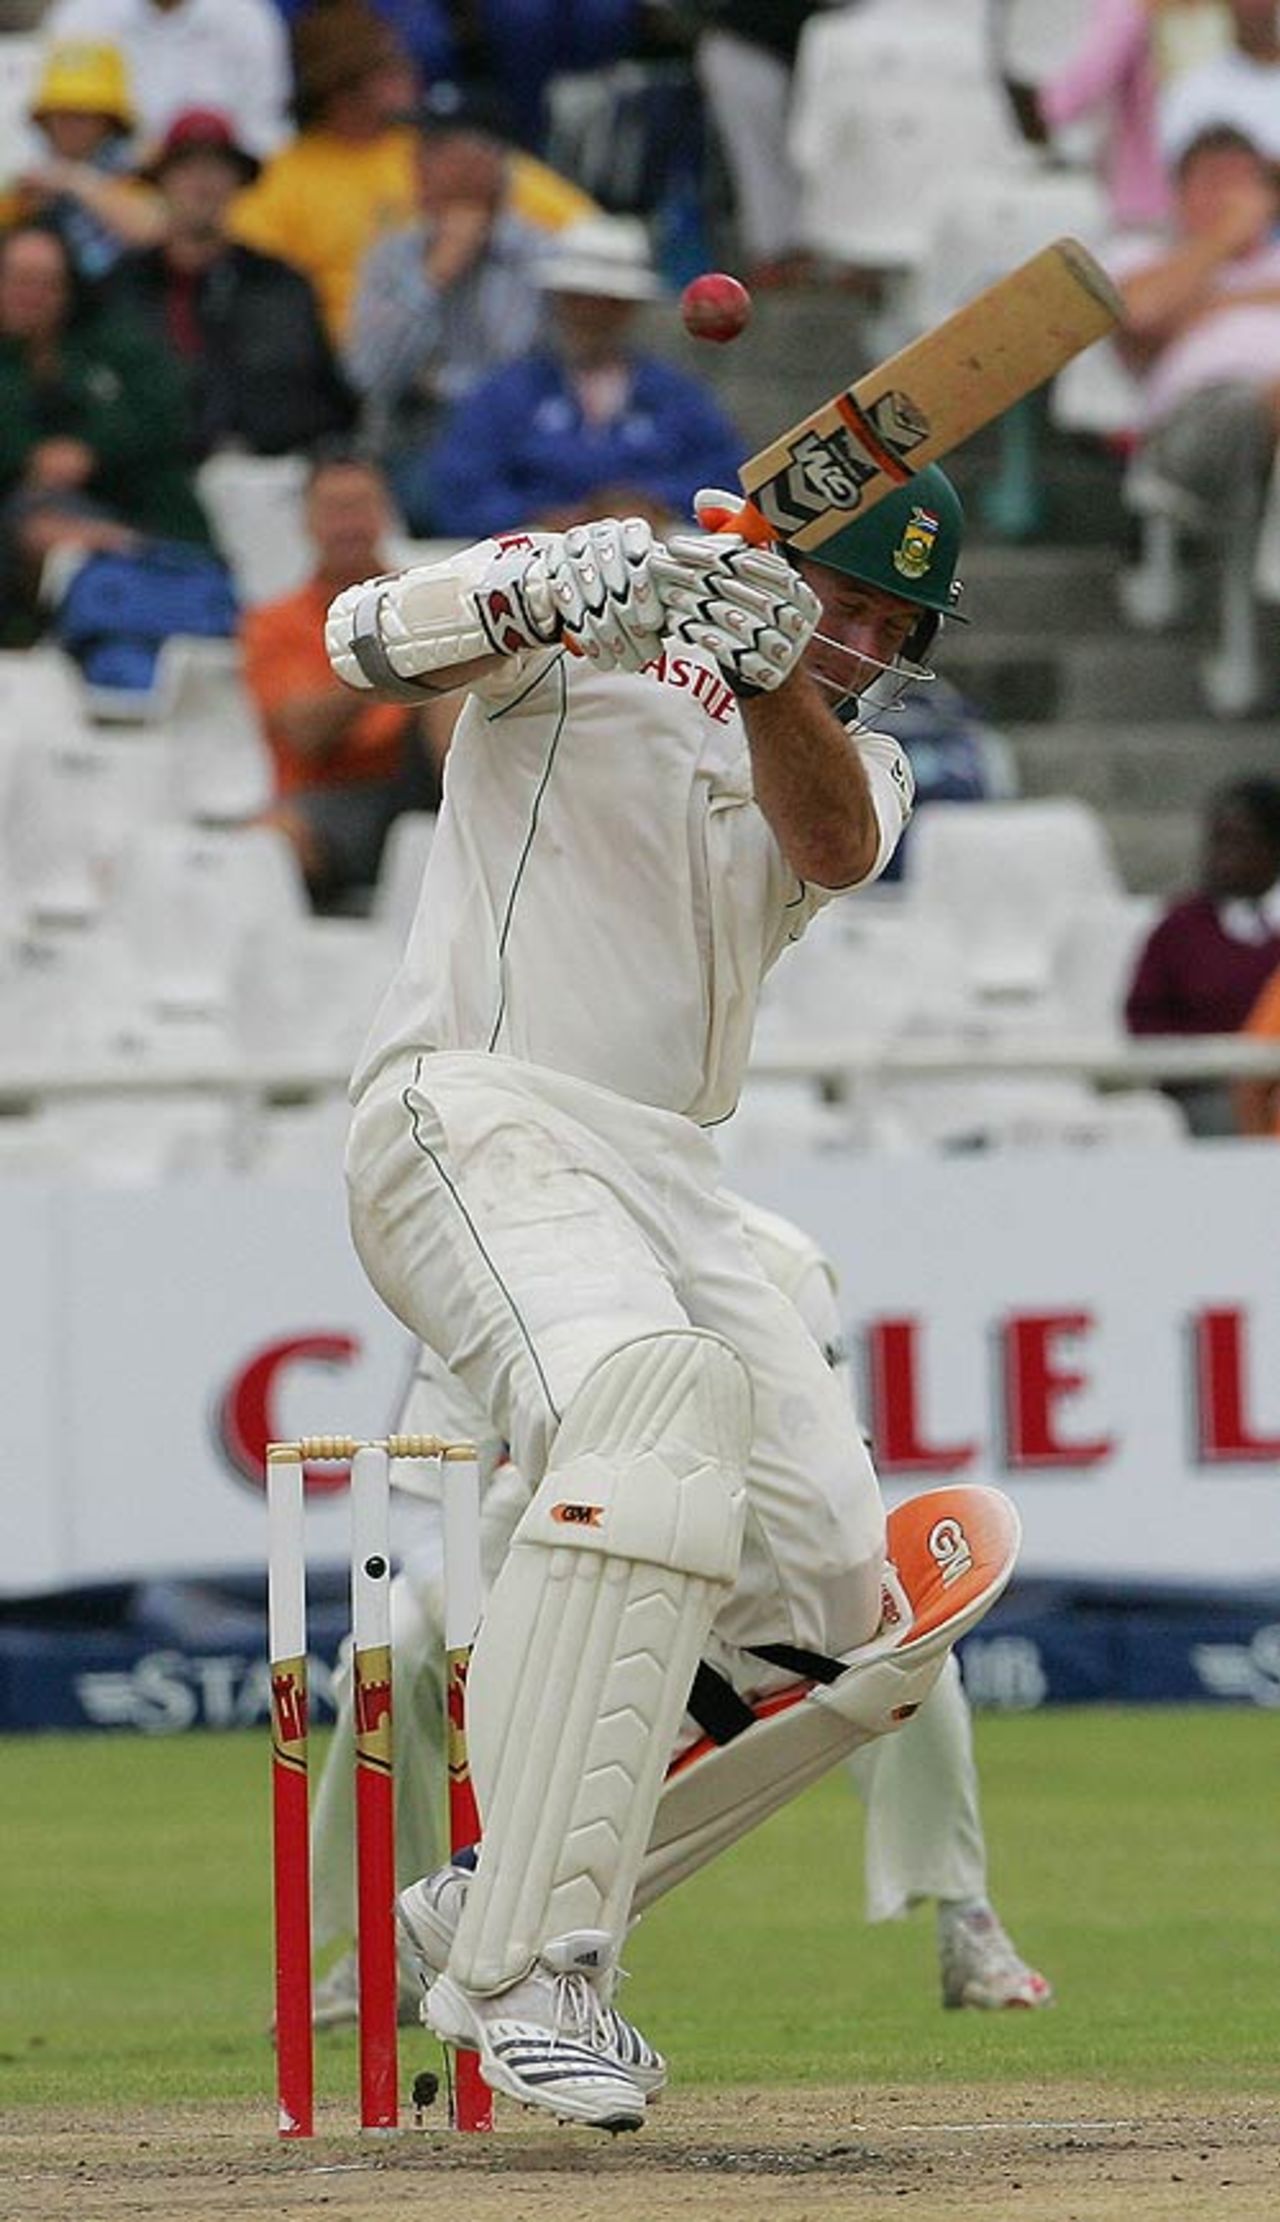 Graeme Smith tries to eveade a short ball, South Africa v India, 3rd Test, Cape Town, 5th day, January 6, 2007